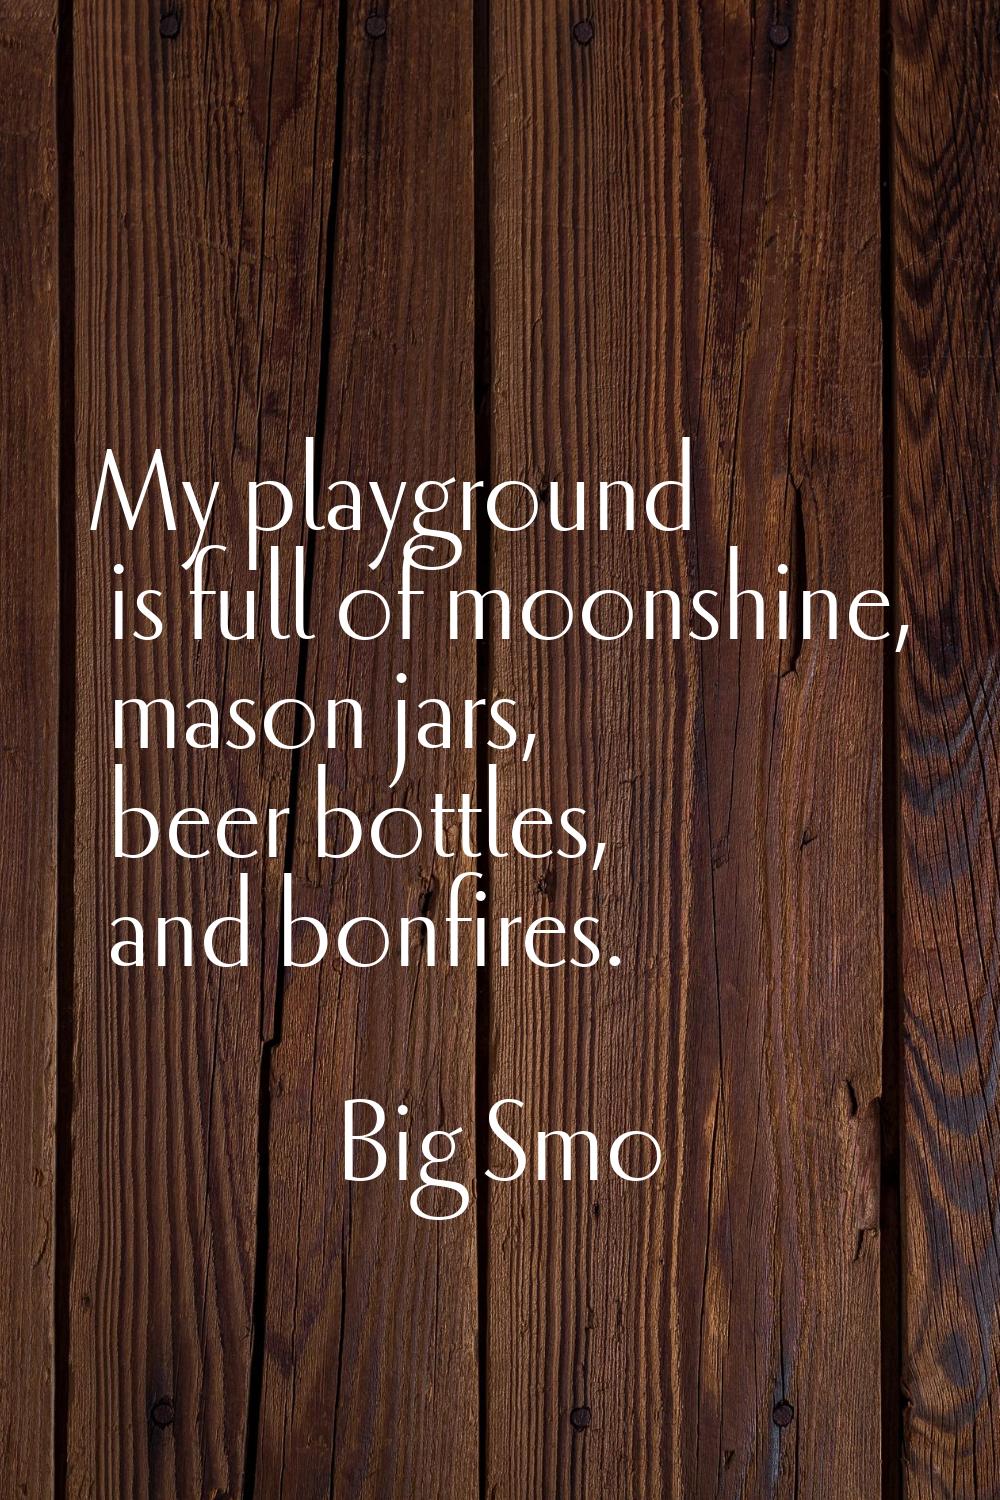 My playground is full of moonshine, mason jars, beer bottles, and bonfires.